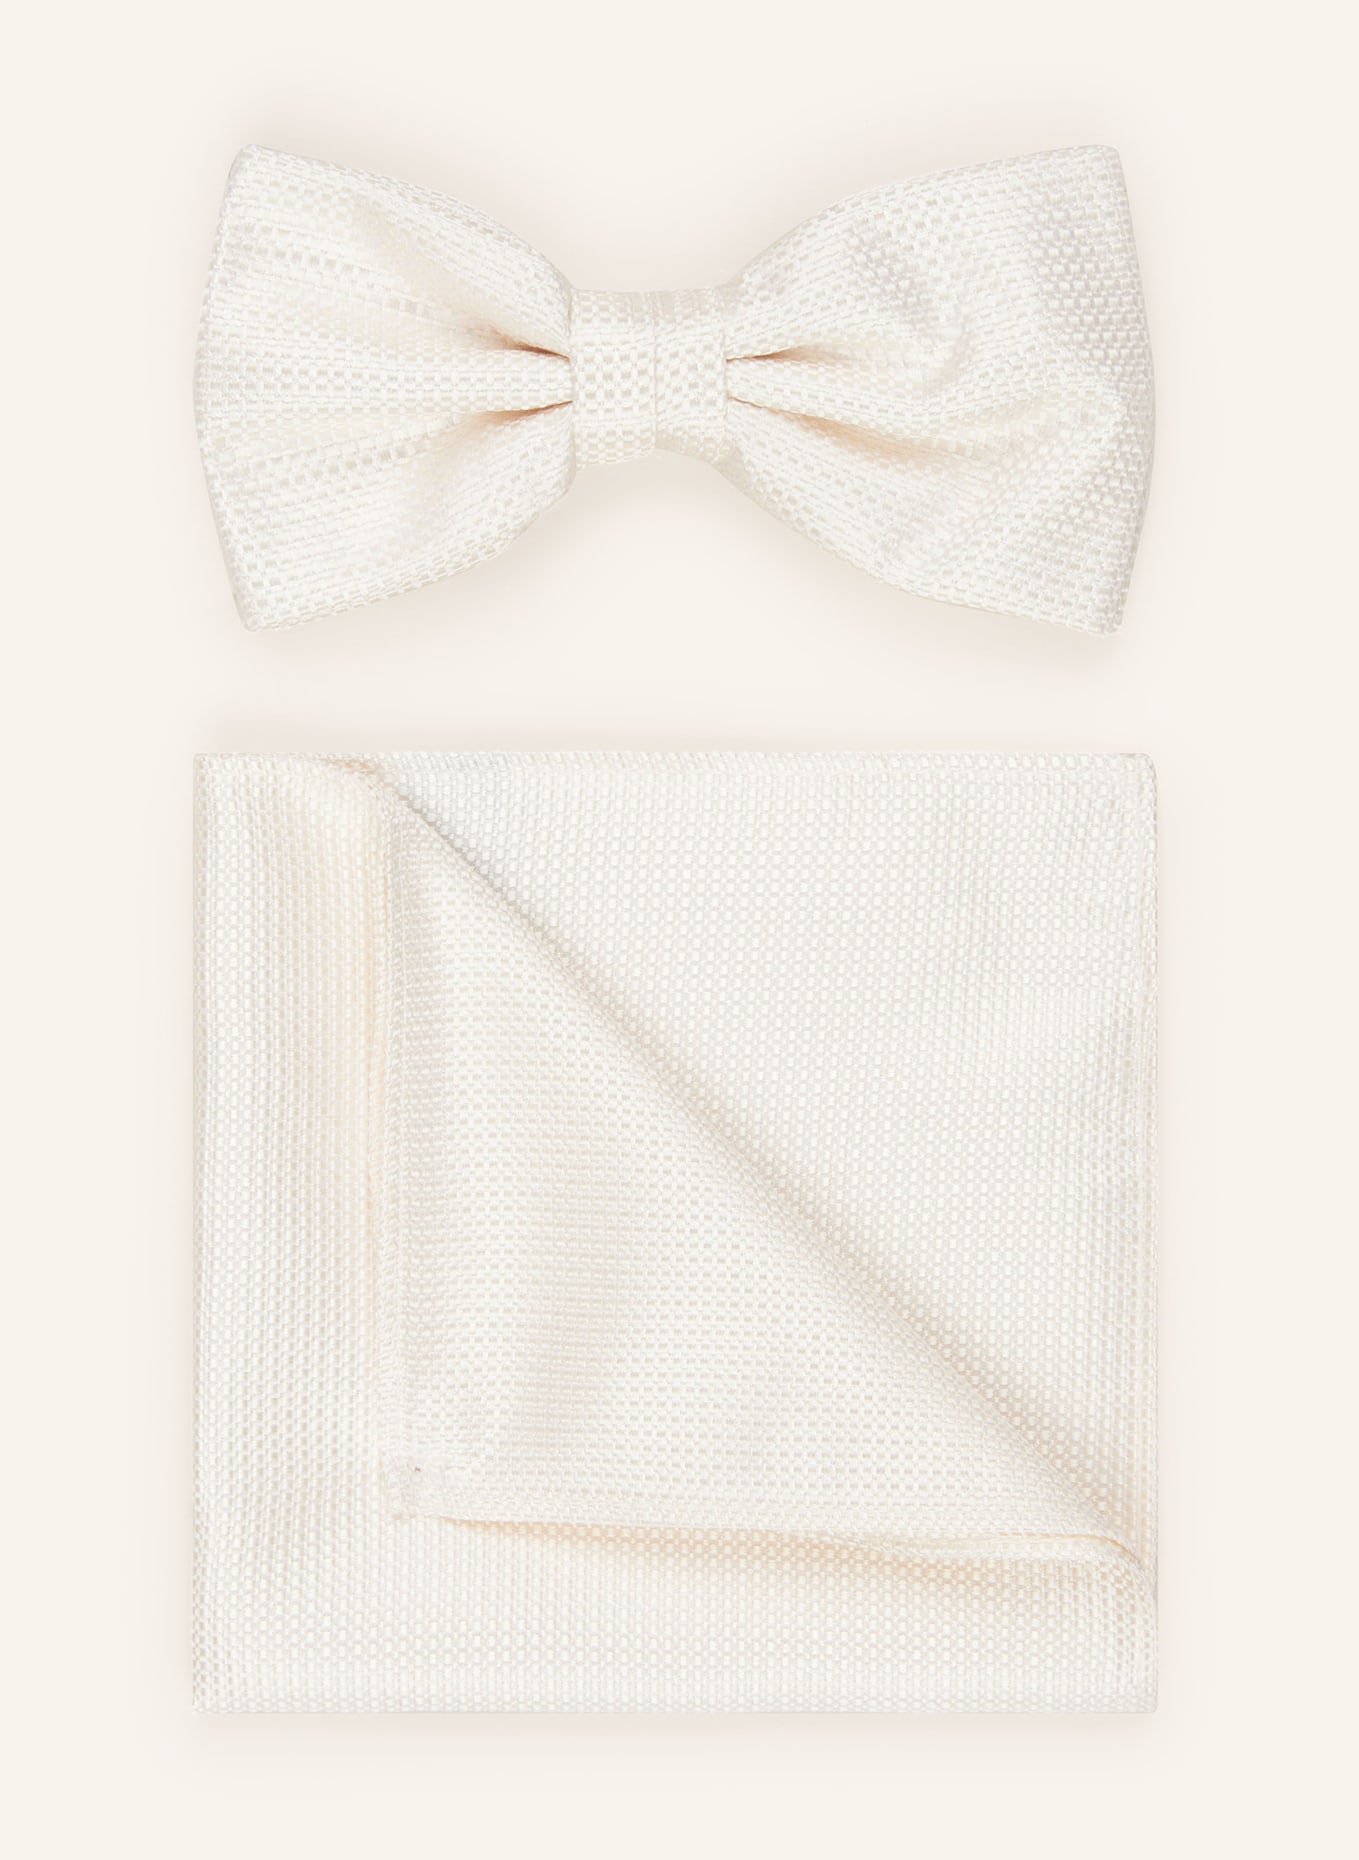 Prince BOWTIE Set: Bow tie and pocket handkerchief, Color: WHITE (Image 1)